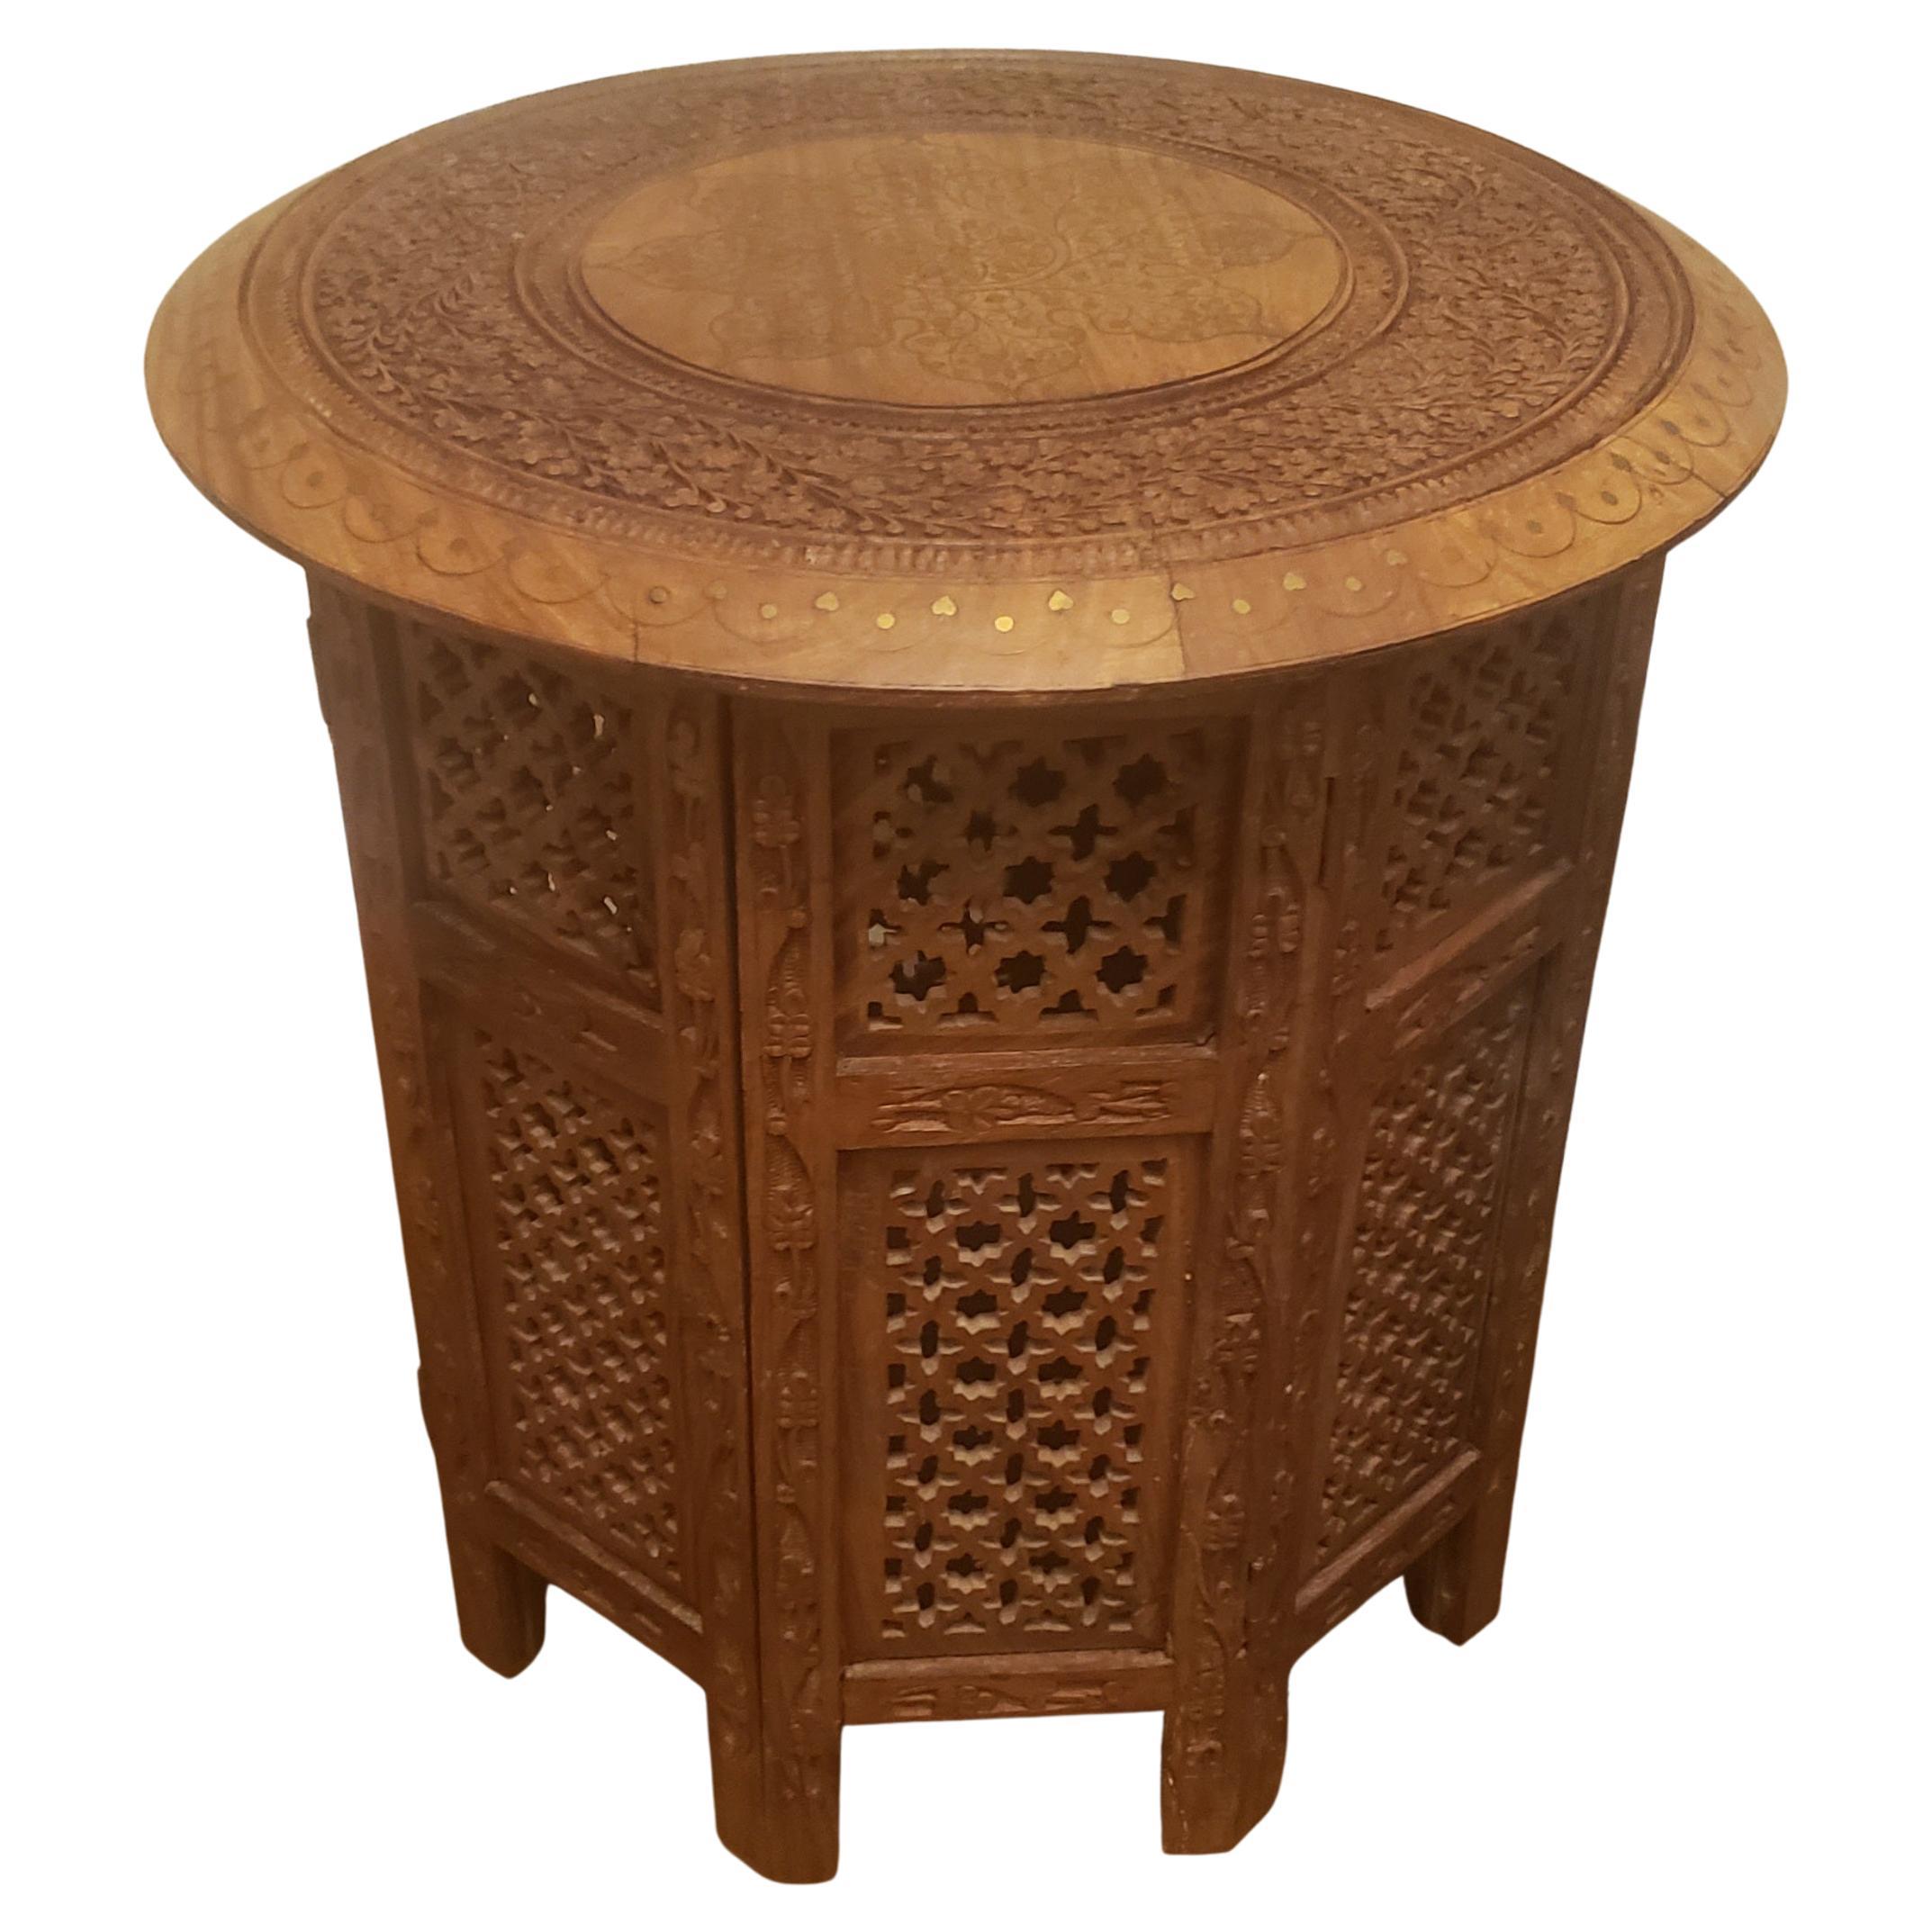 1950s Anglo-Indian Octagonal Carved Teak Collapsible Side Table with Brass Inlay In Good Condition For Sale In Germantown, MD